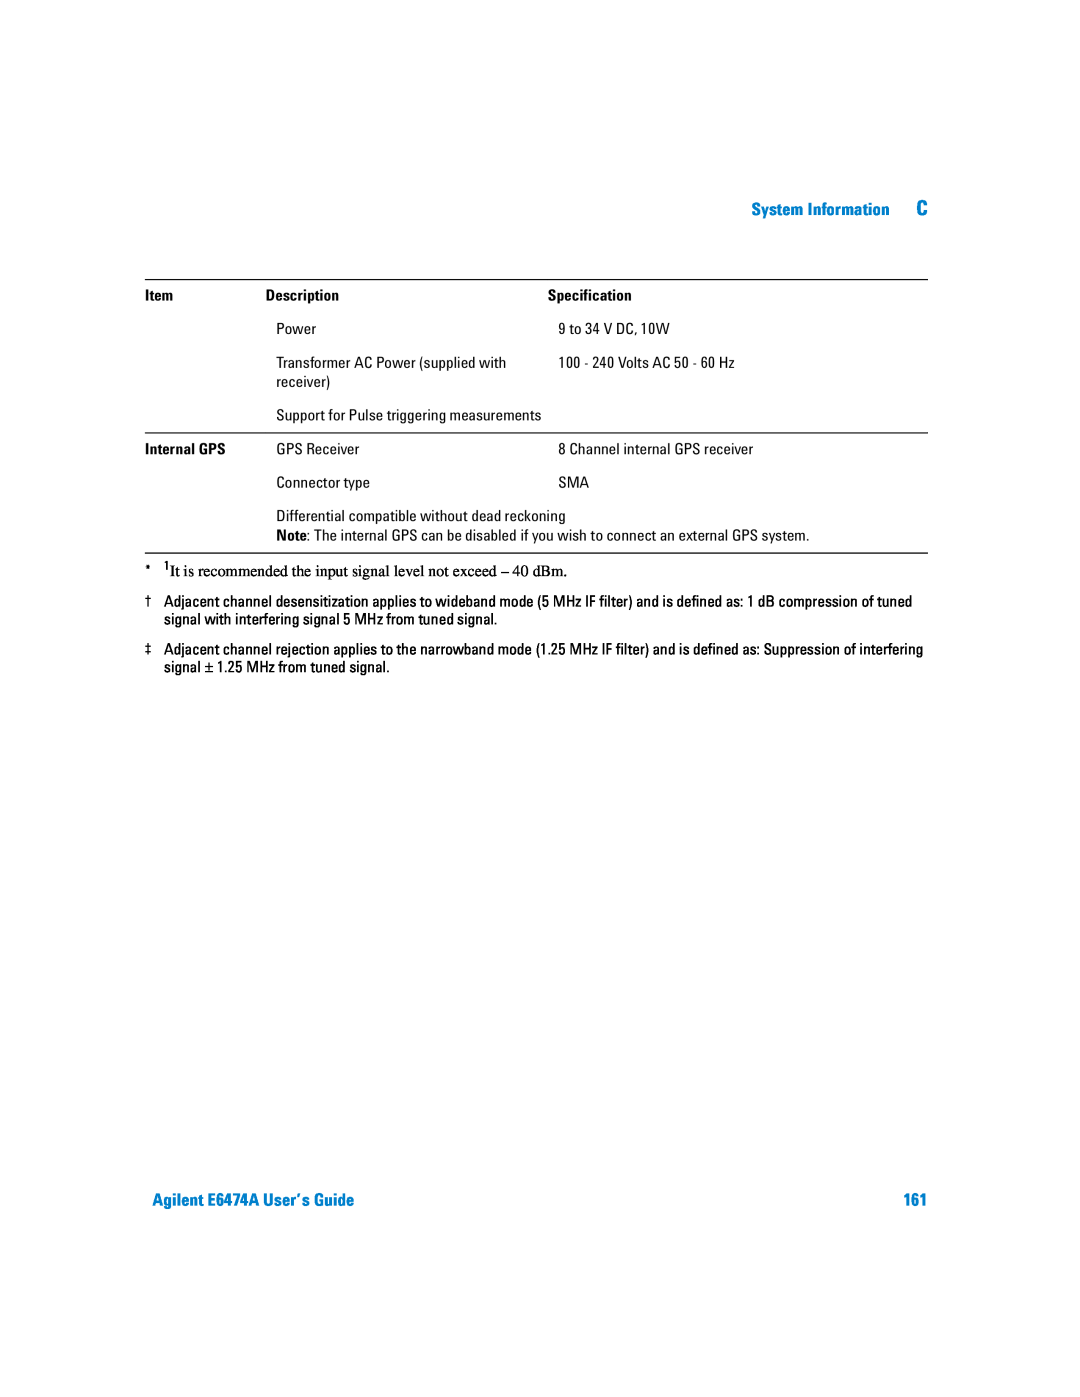 Agilent Technologies manual System Information, Agilent E6474A User’s Guide, Support for Pulse triggering measurements 